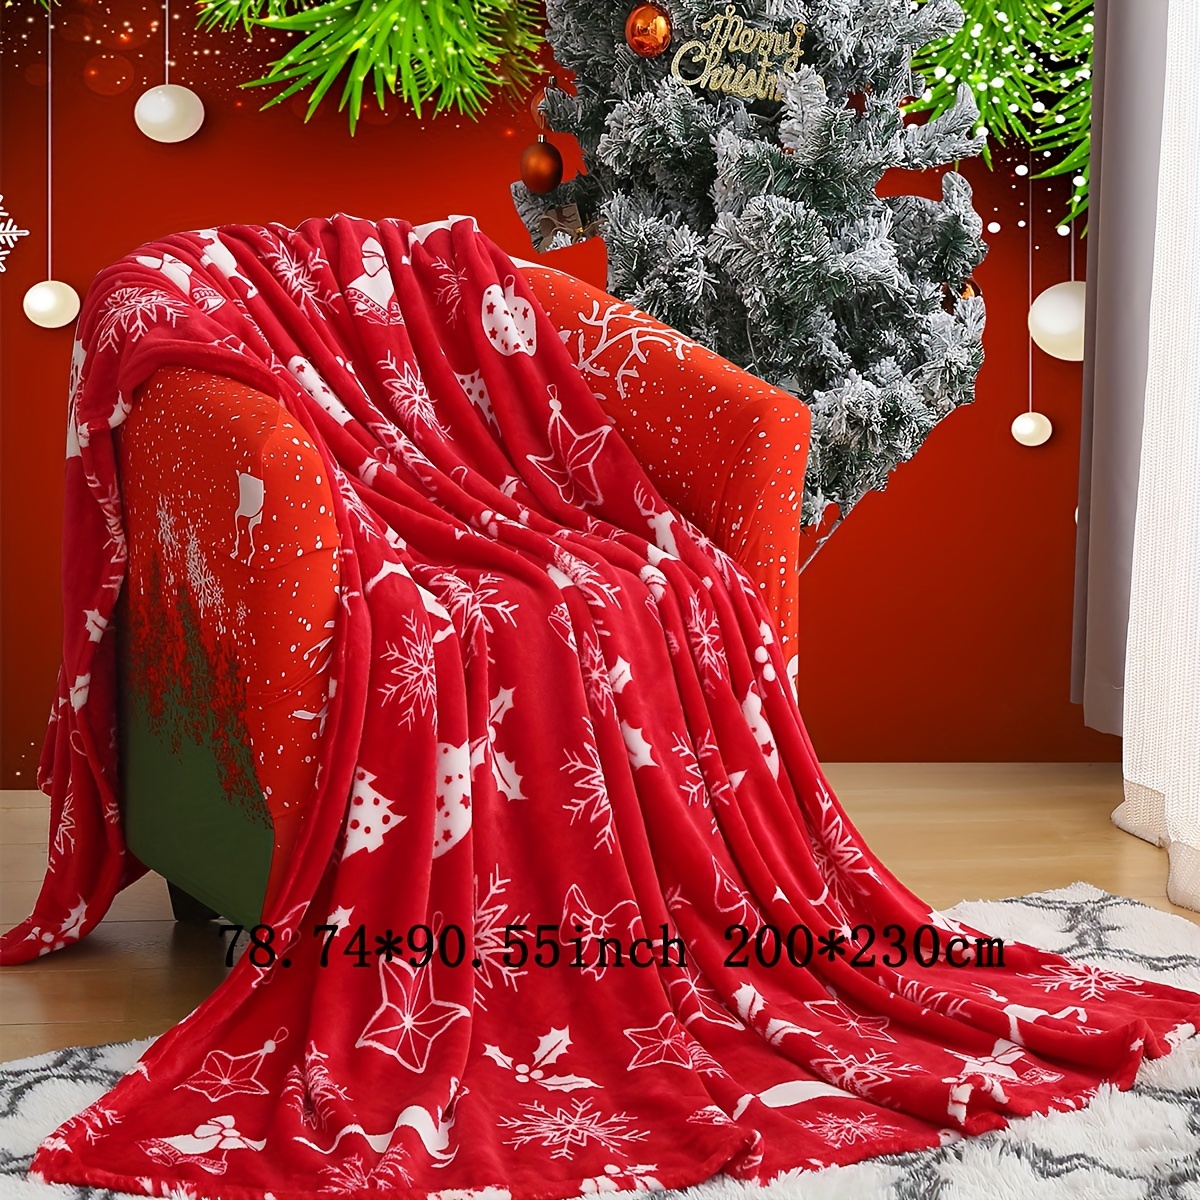 Christmas Throw Blanket for Couch Red Christmas Fleece Blanket